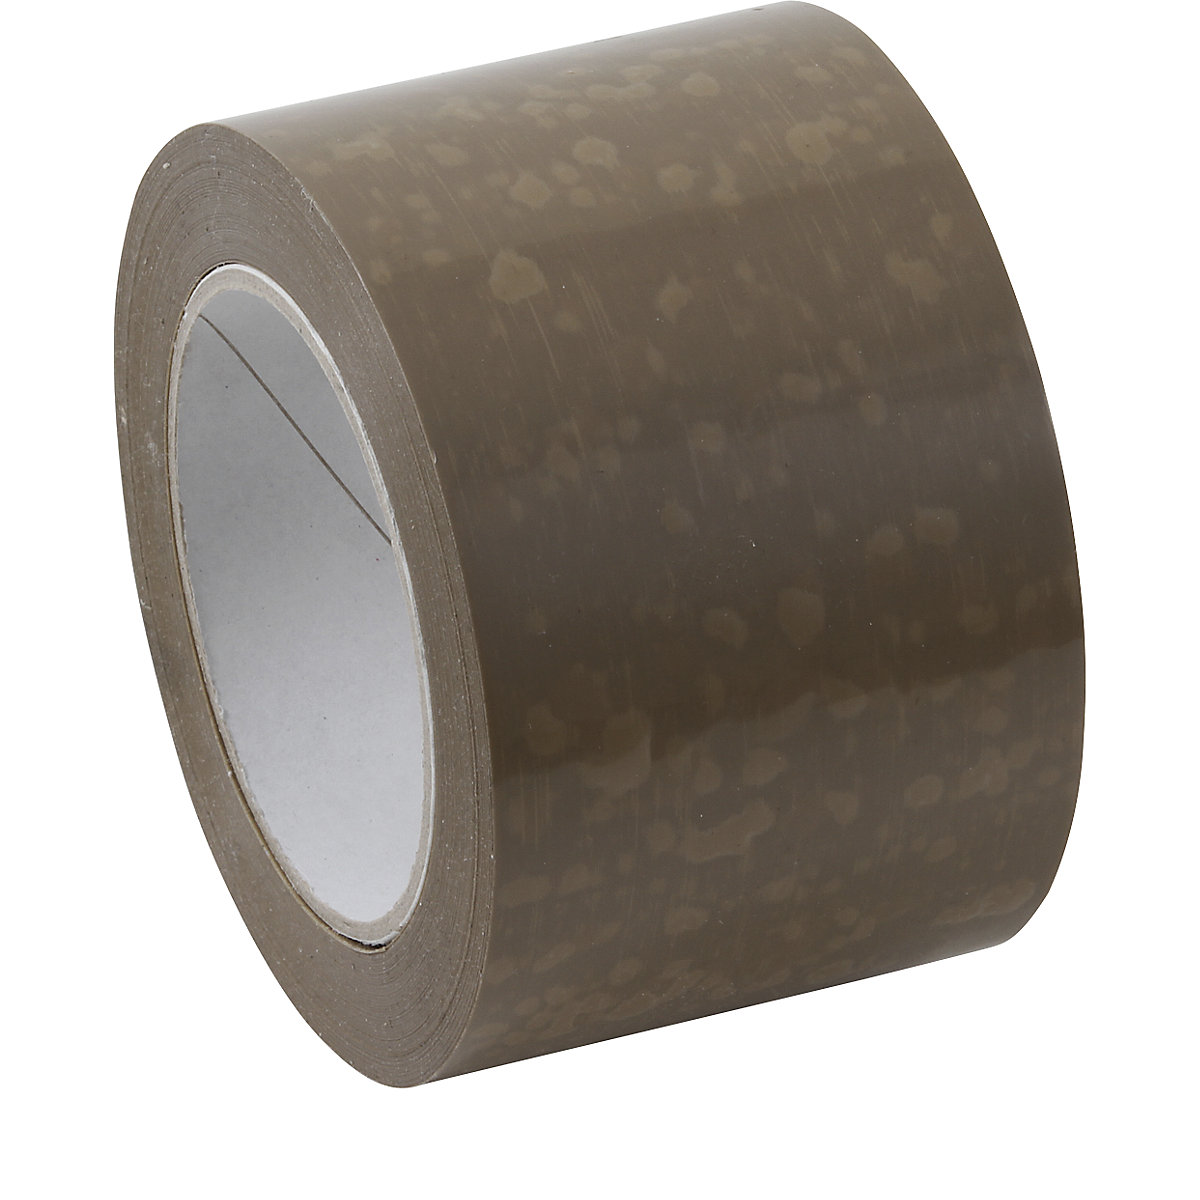 PVC packing tape, extra strong model, pack of 24 rolls, brown, tape width 75 mm-3